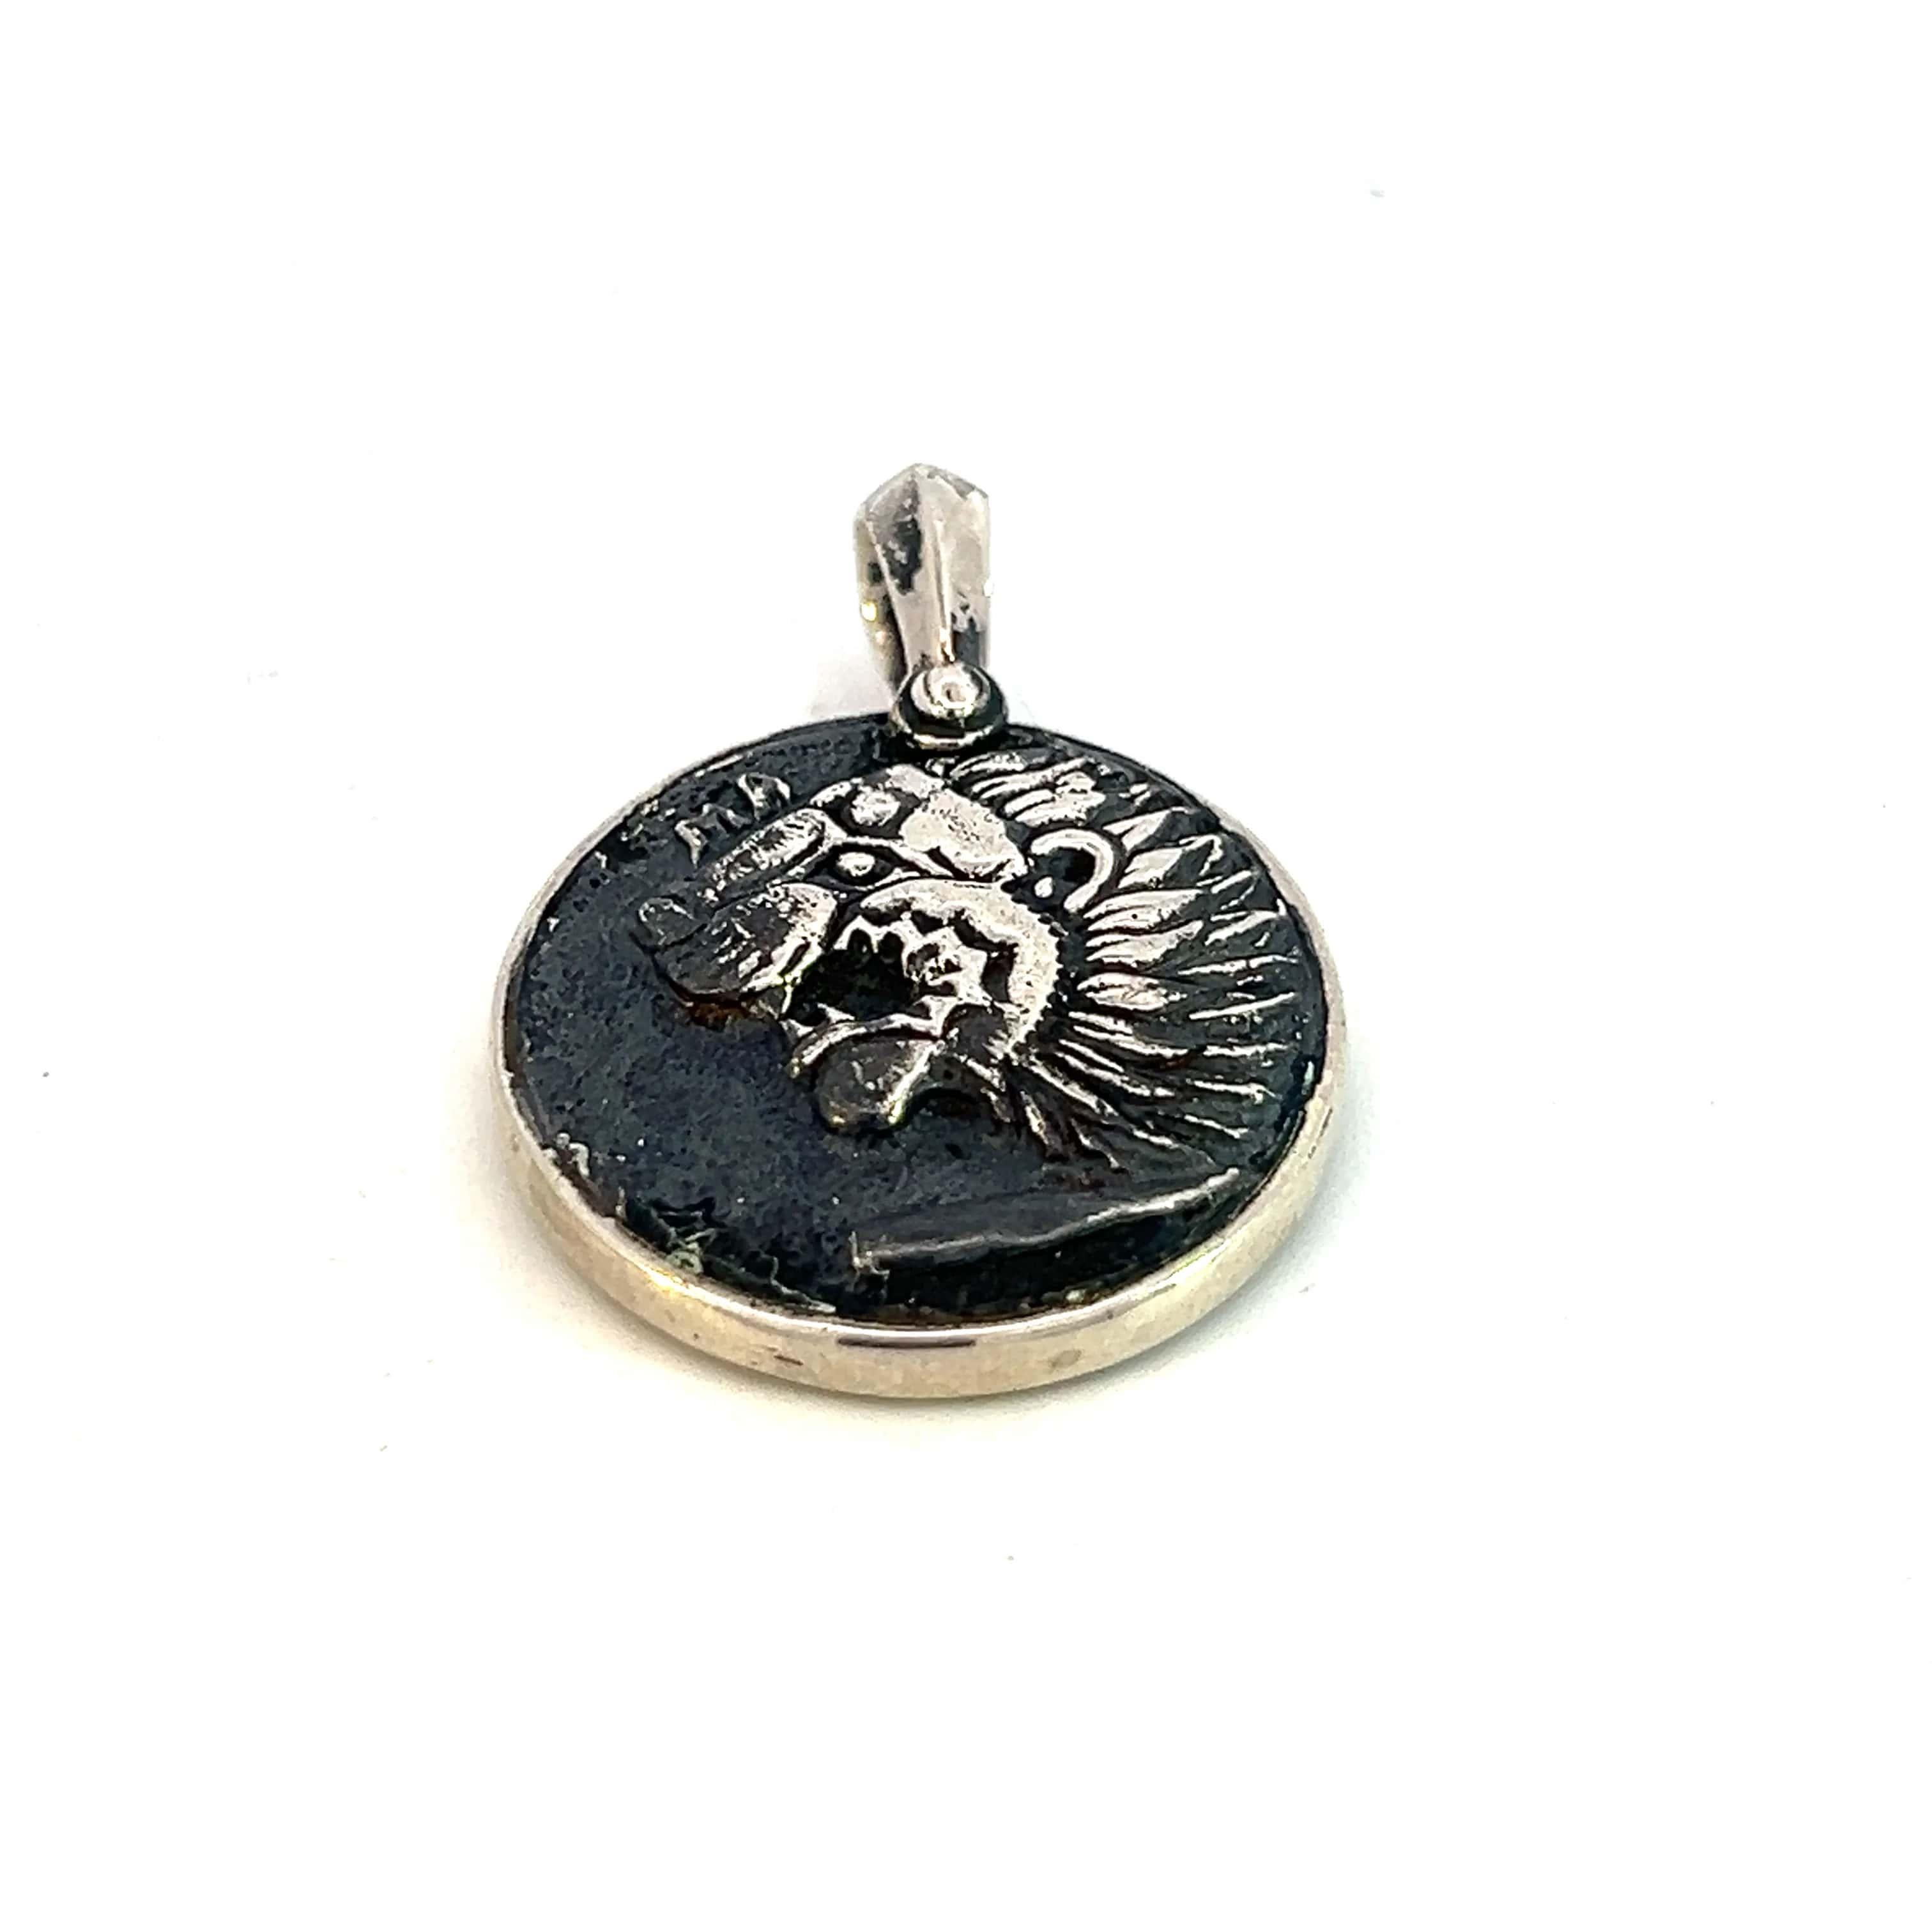 Authentic David Yurman Estate Petrus Lion Amulet Silver DY396

Retail: $425.00

TRUSTED SELLER SINCE 2002

PLEASE SEE OUR HUNDREDS OF POSITIVE FEEDBACKS FROM OUR CLIENTS!!

FREE SHIPPING

This elegant Authentic David Yurman sterling silver Petrus